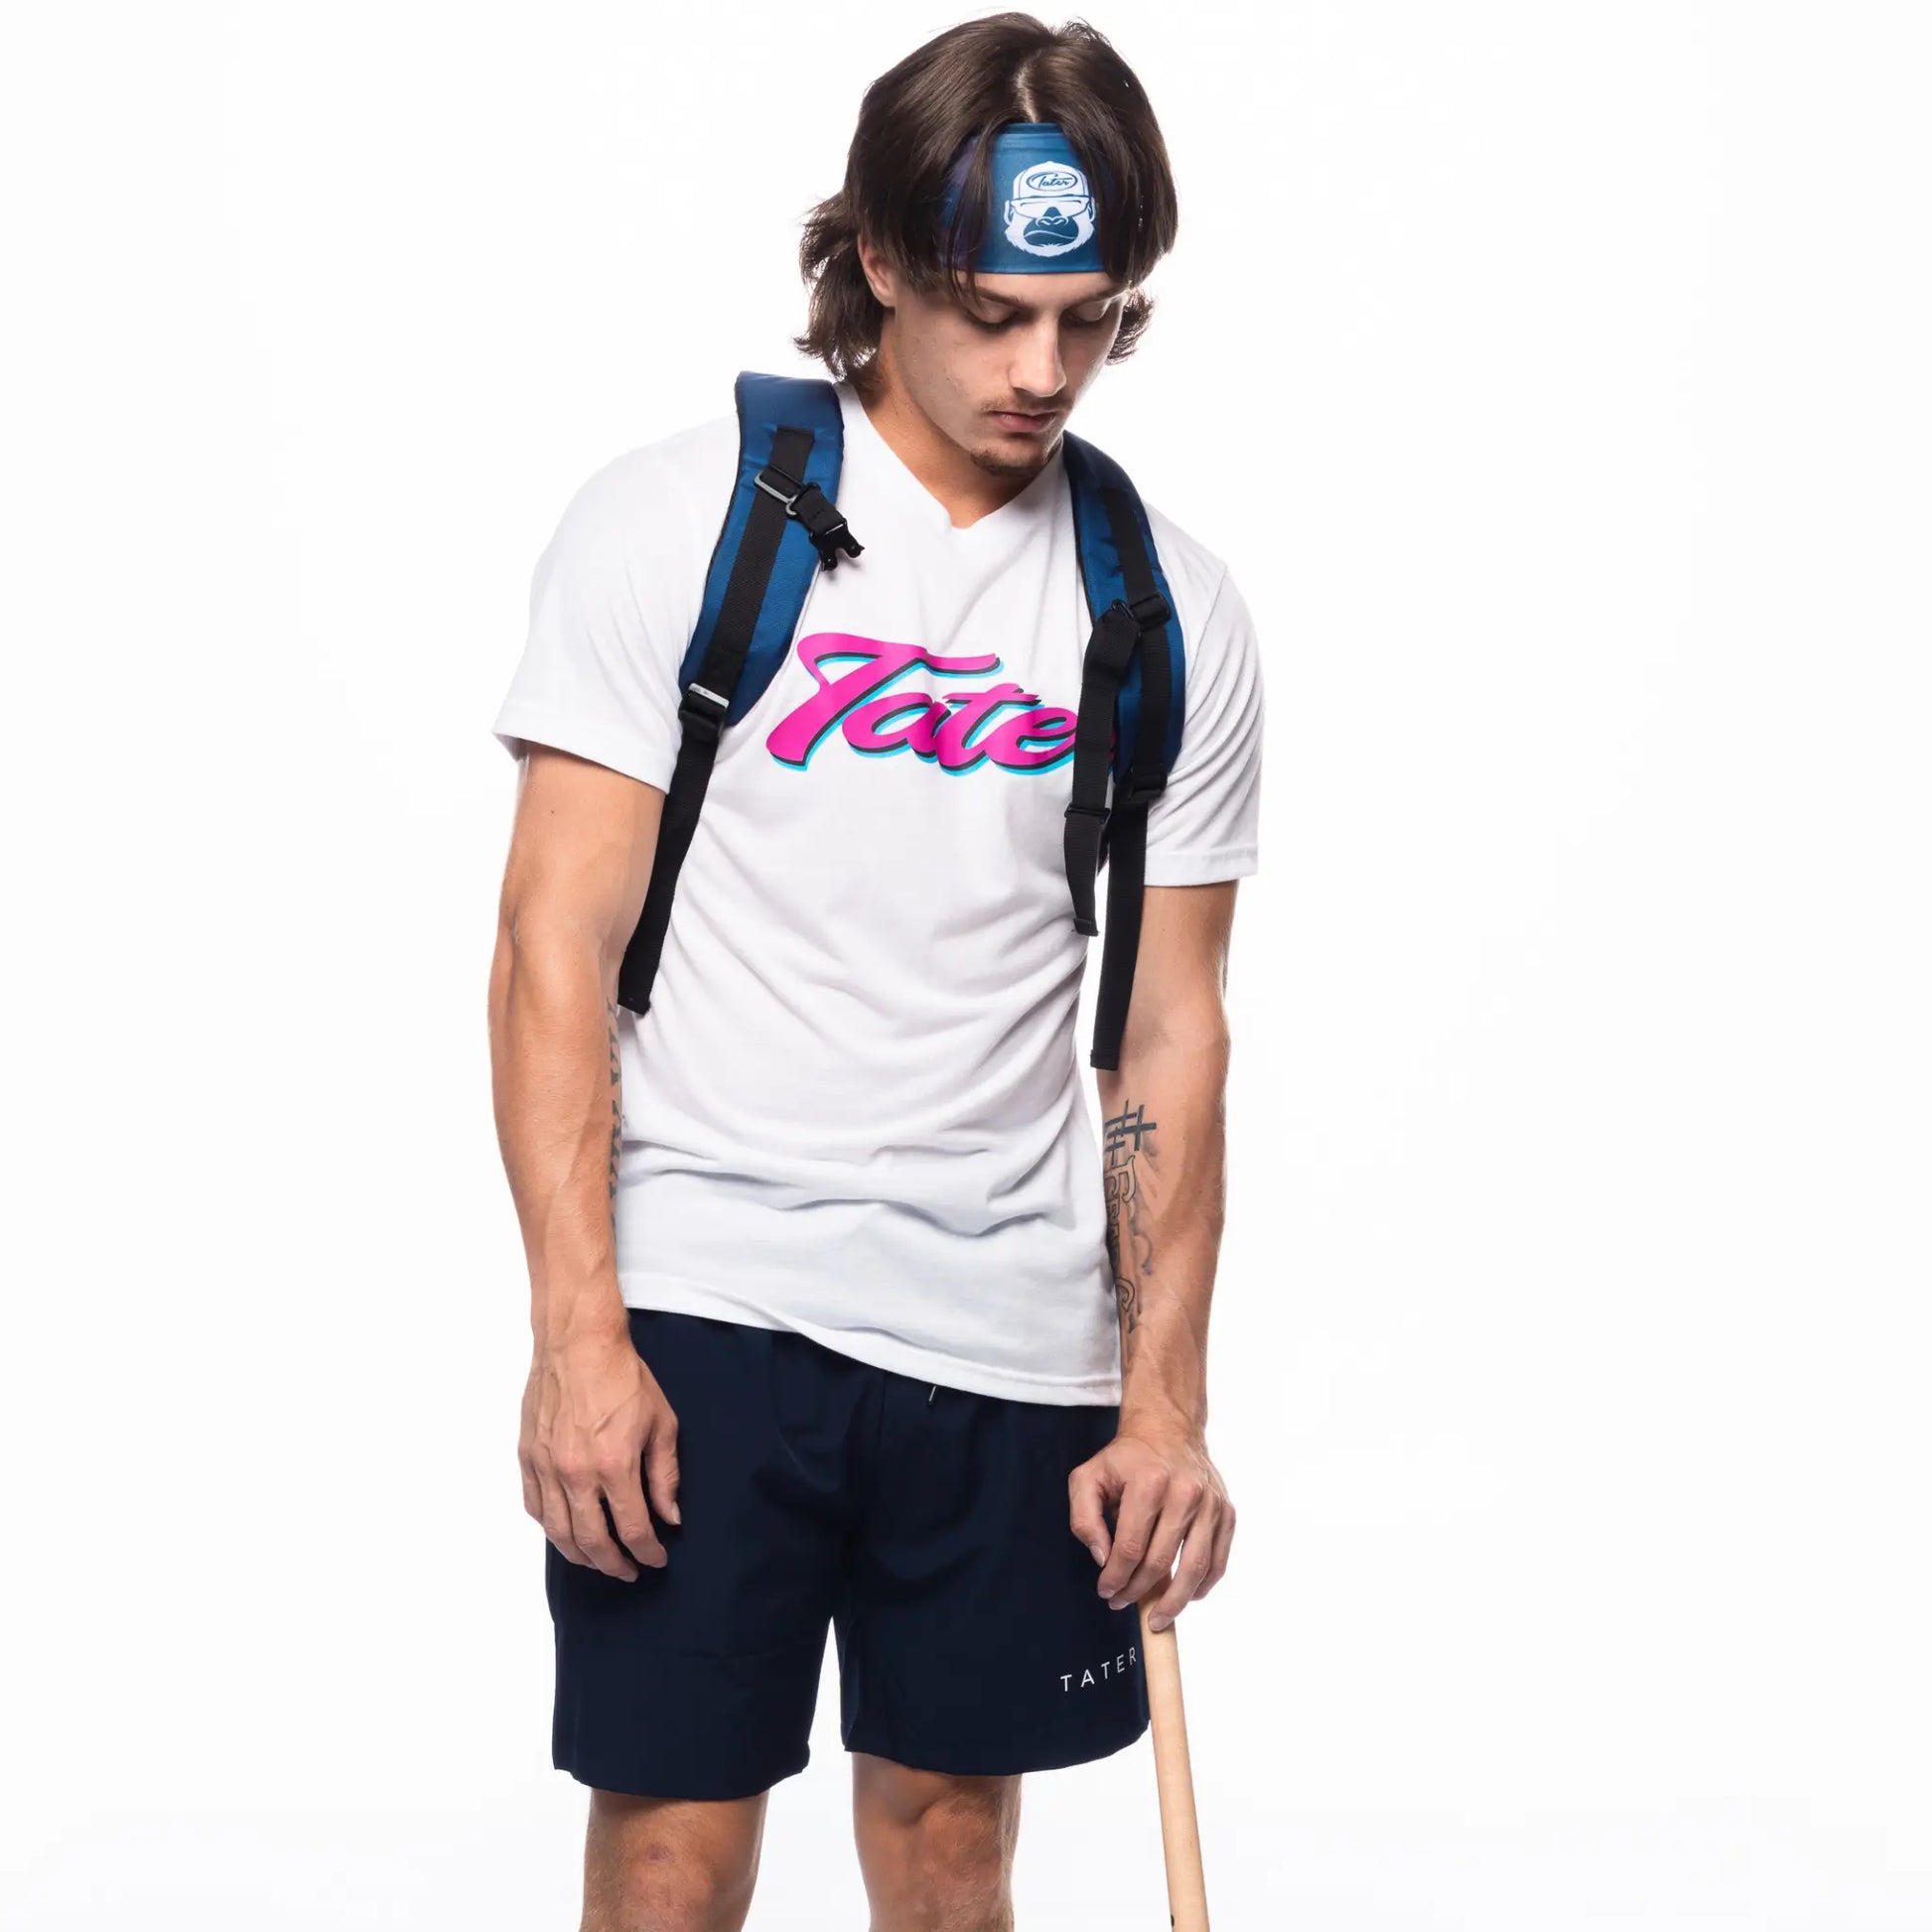 In the image, there is a male model wearing a white T-shirt with a colorful "Tater" logo on the front, navy workout shorts with the Tater brand name, a baseball headband, and a black backpack. He is also holding a wooden baseball bat in his right hand. The overall look appears to be casual and suitable for both athletic activities and casual wear.